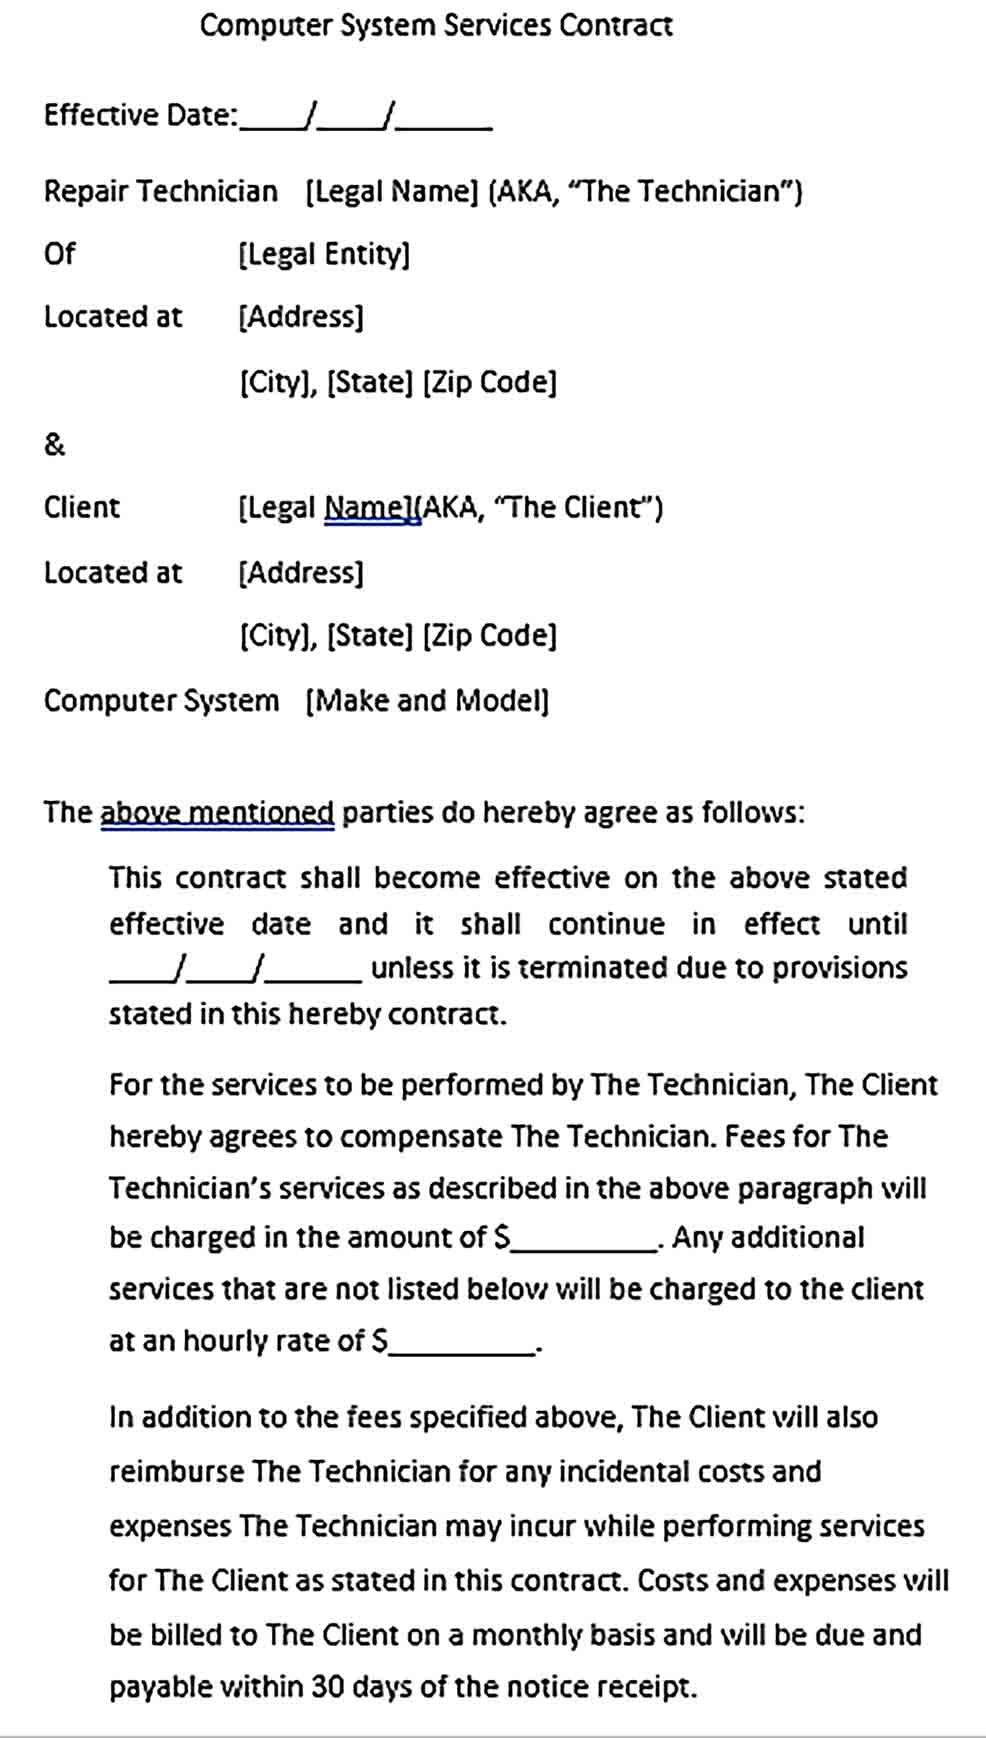 Sample Computer System Services Contract